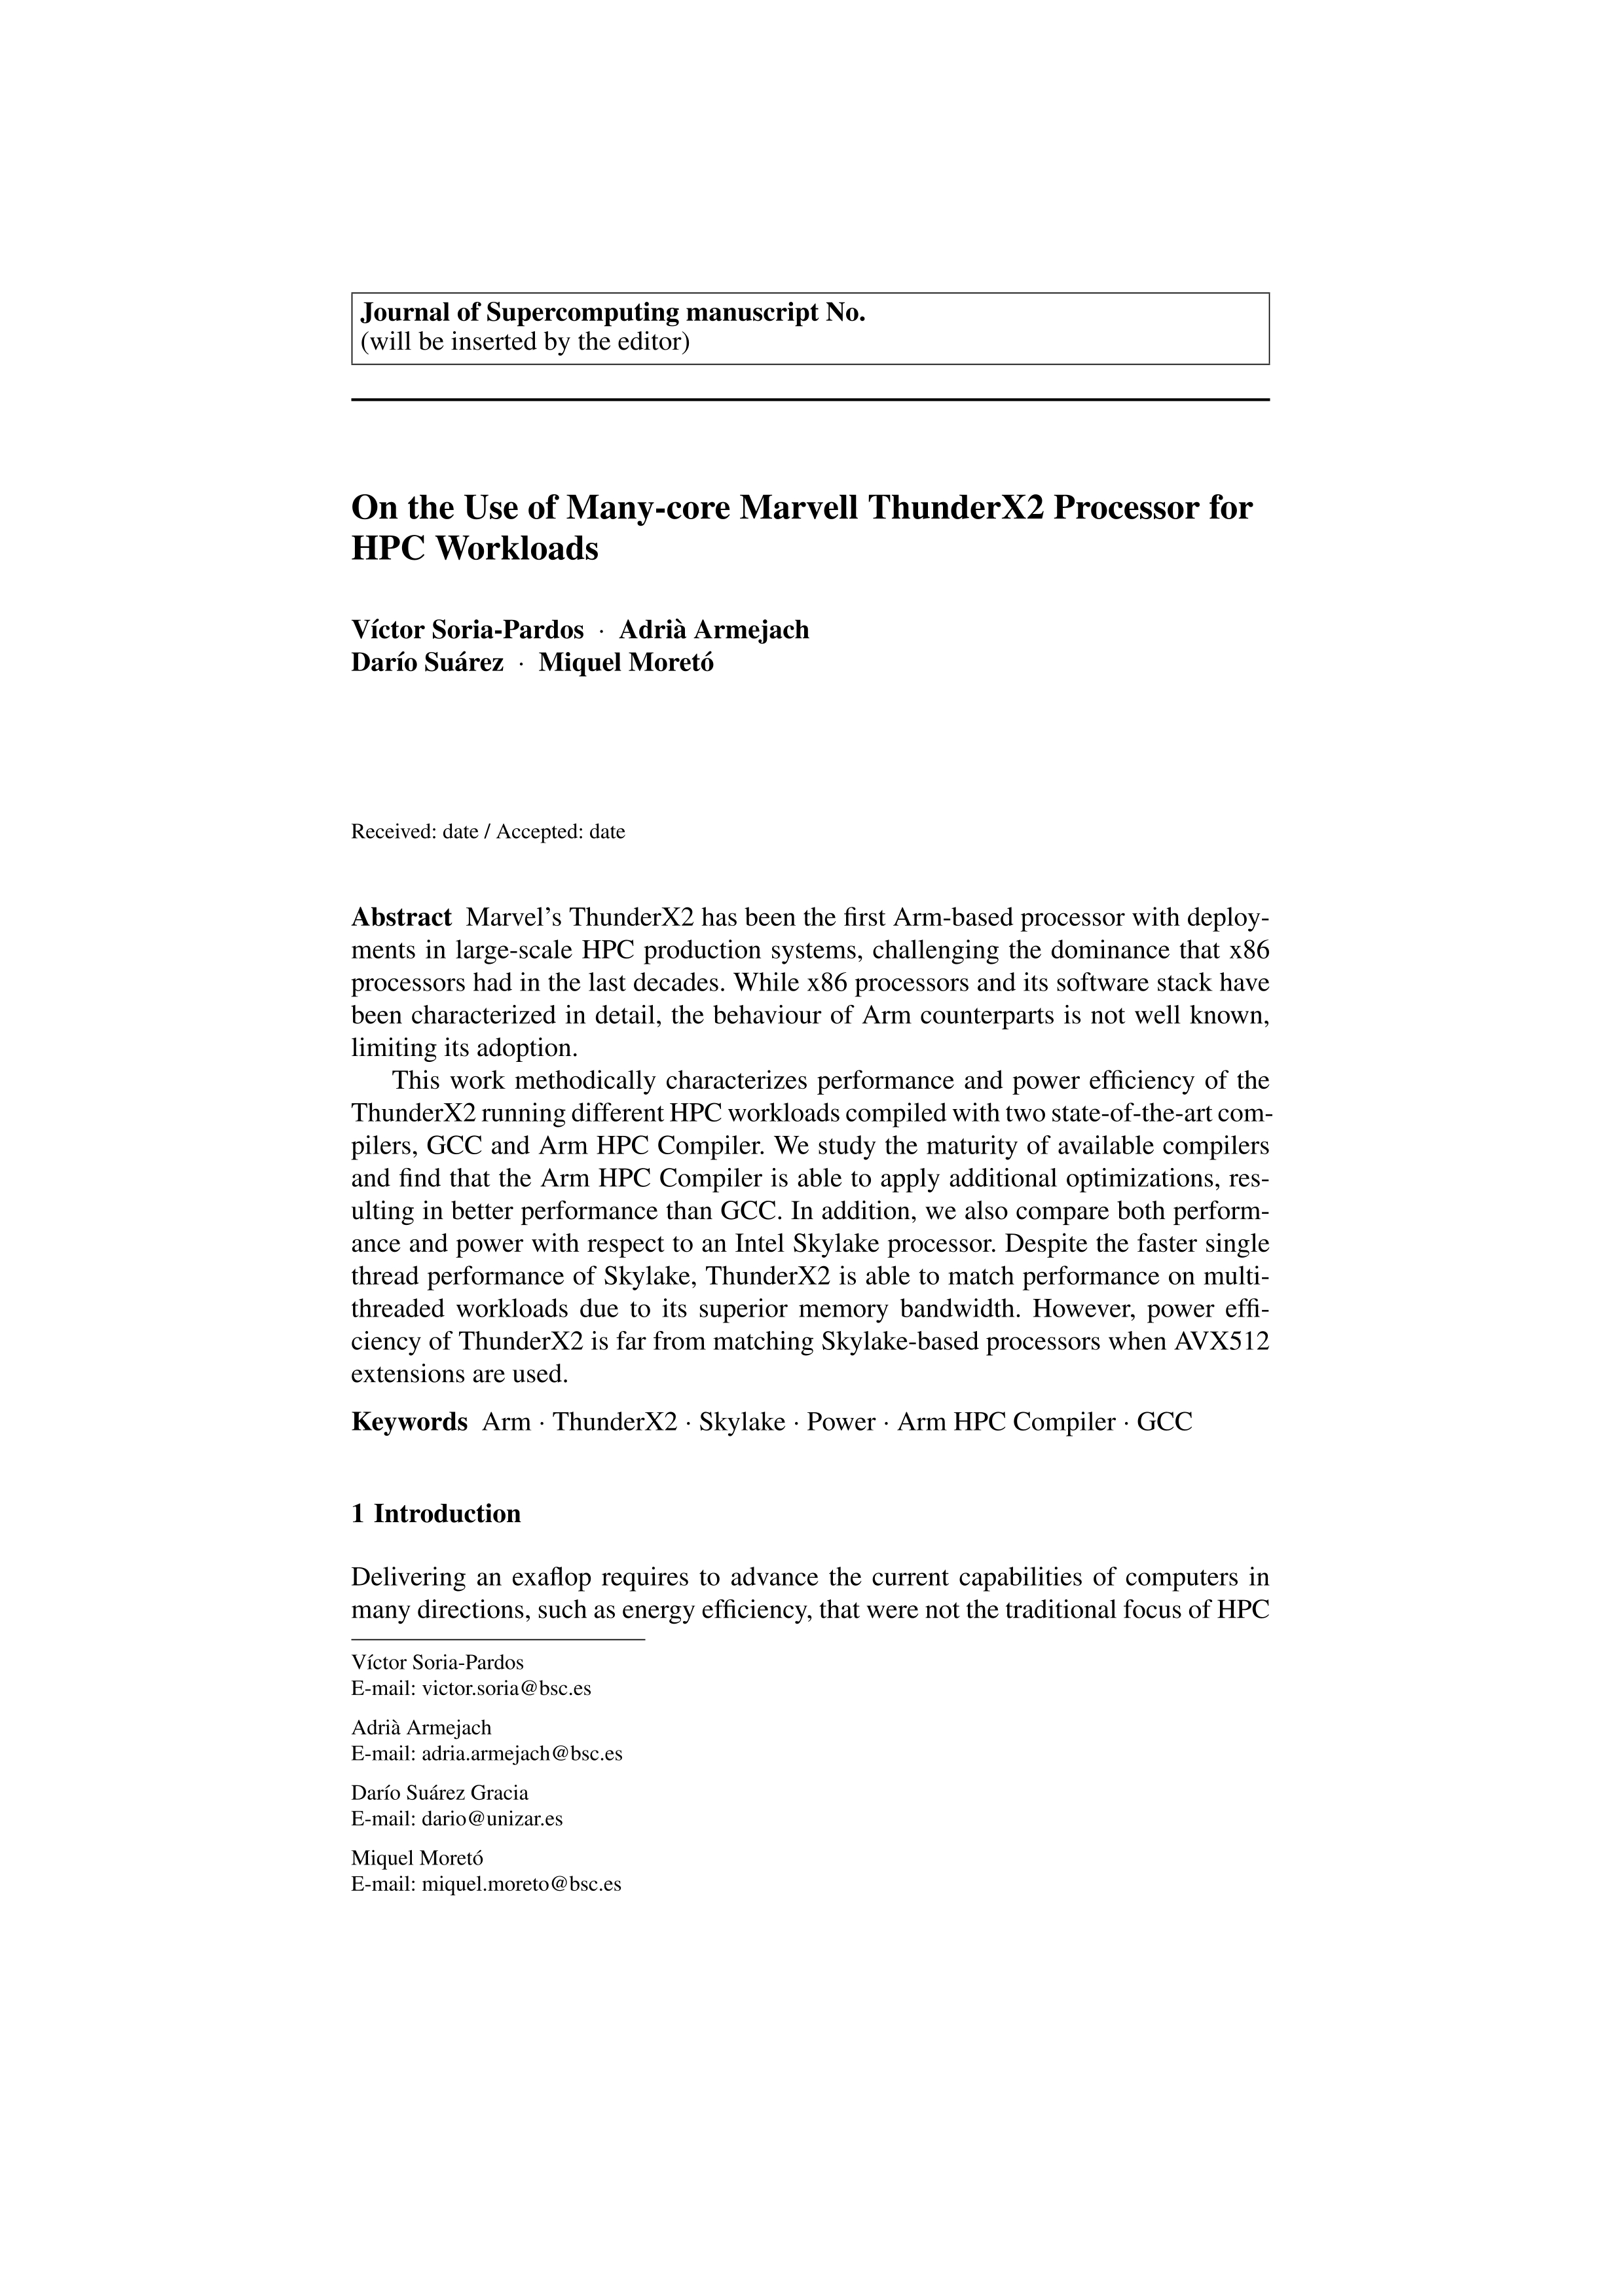 On the use of many-core Marvell ThunderX2 processor for HPC workloads